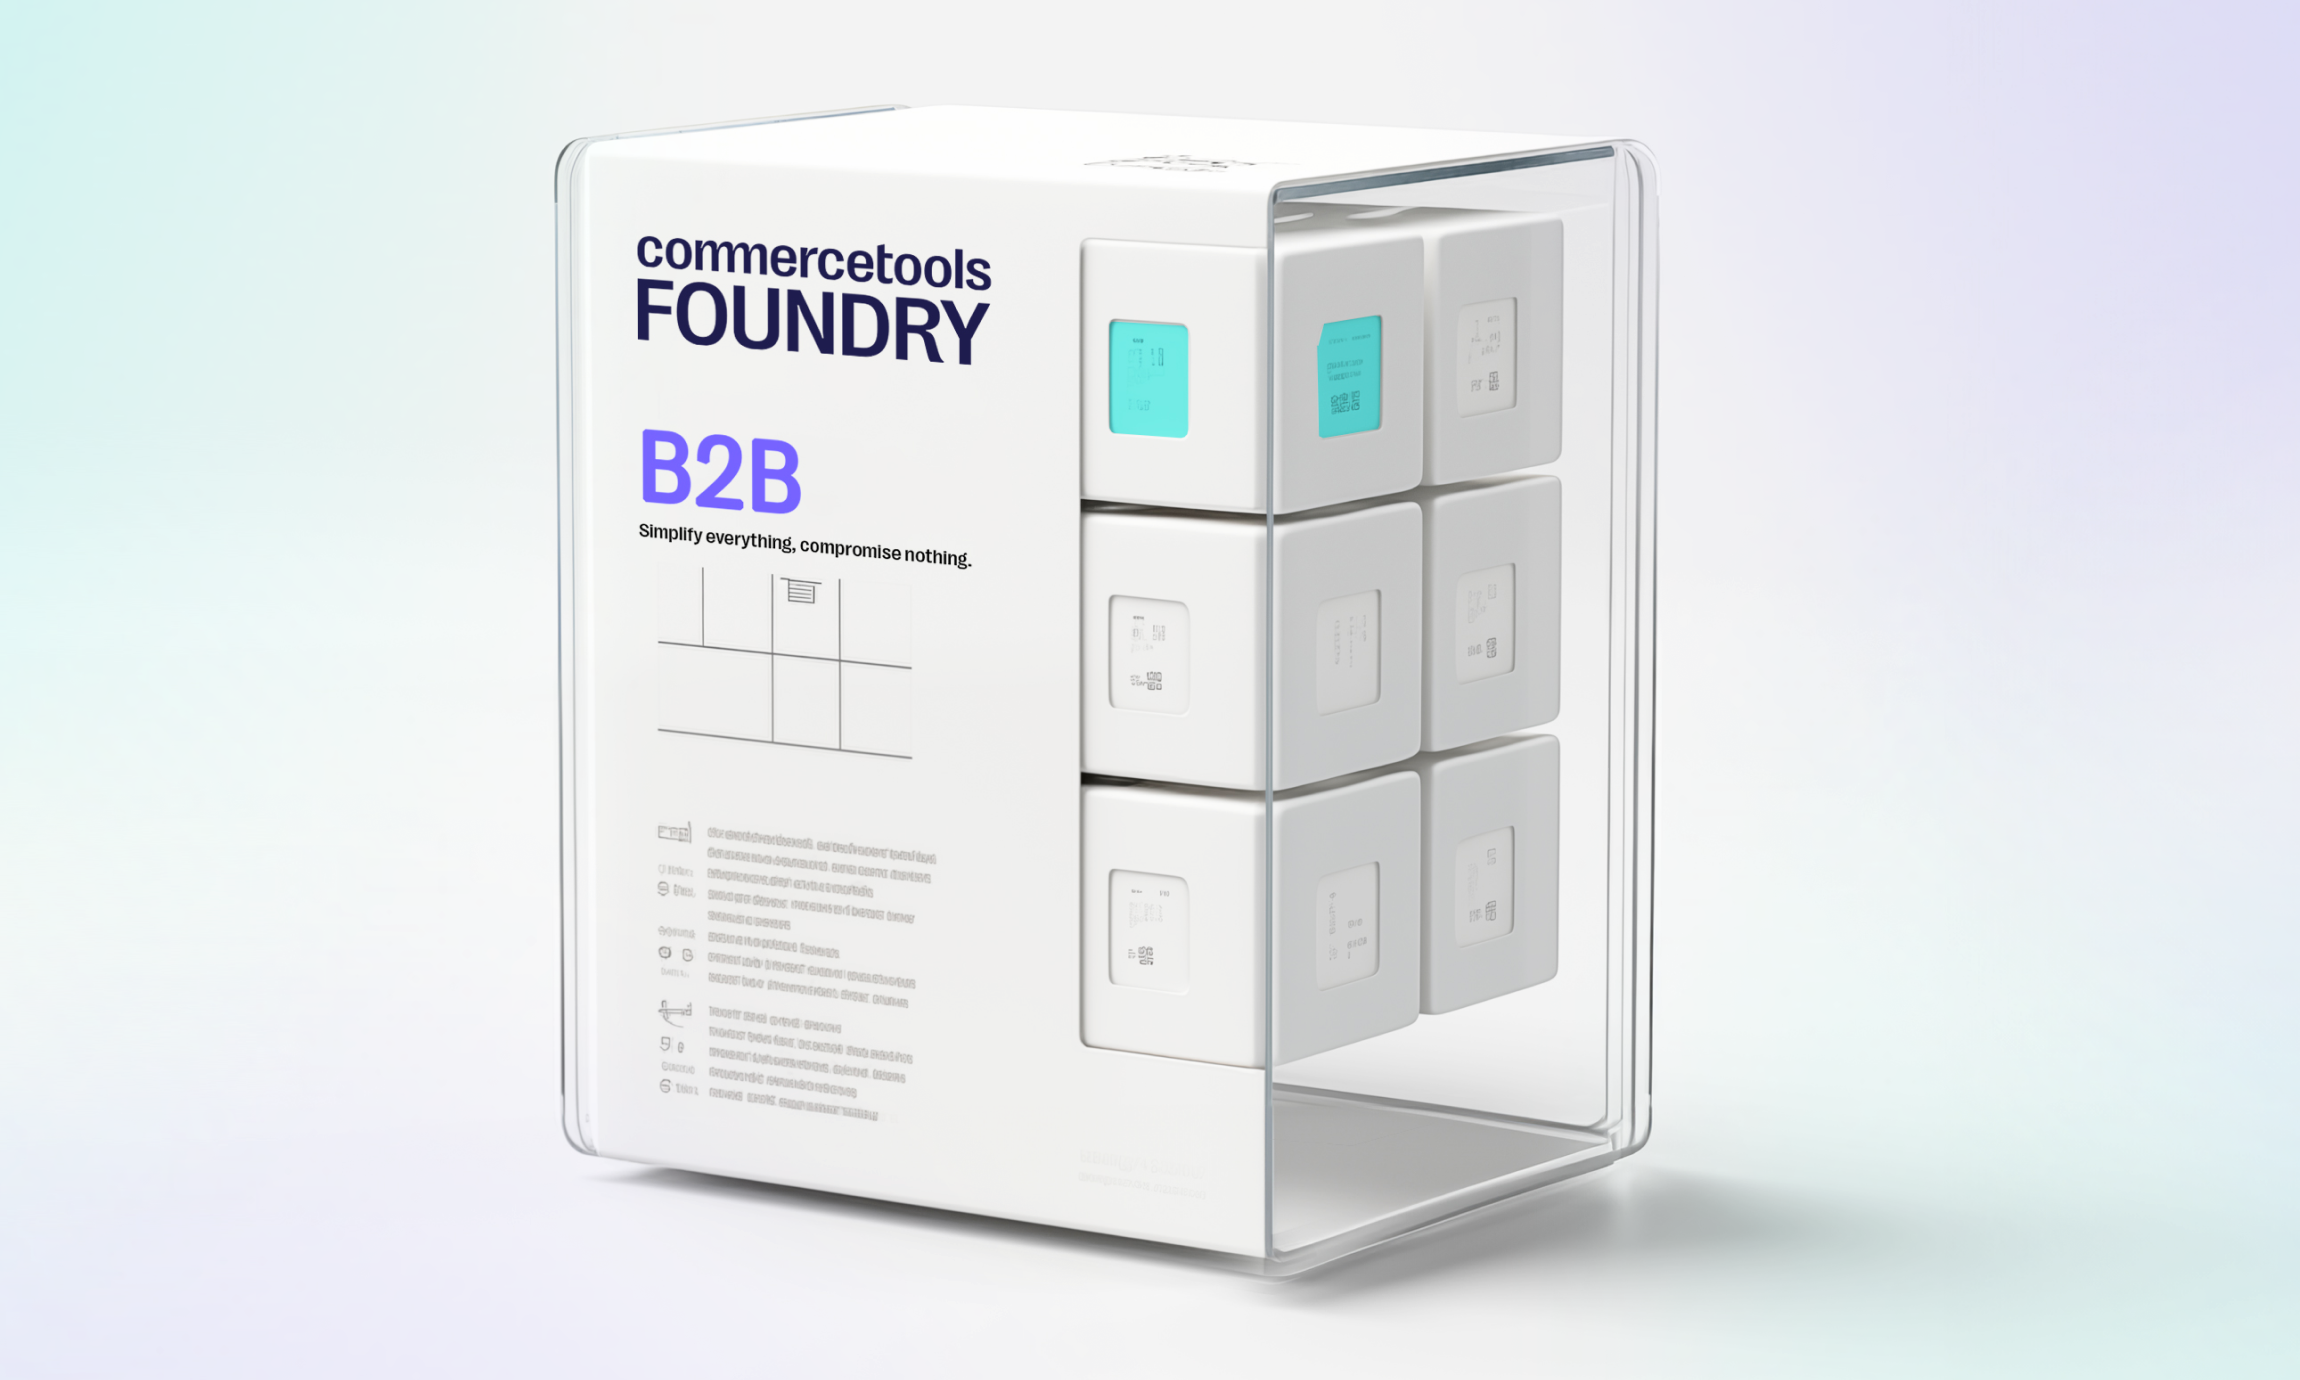 Introducing commercetools Foundry Blueprint for B2B Manufacturing